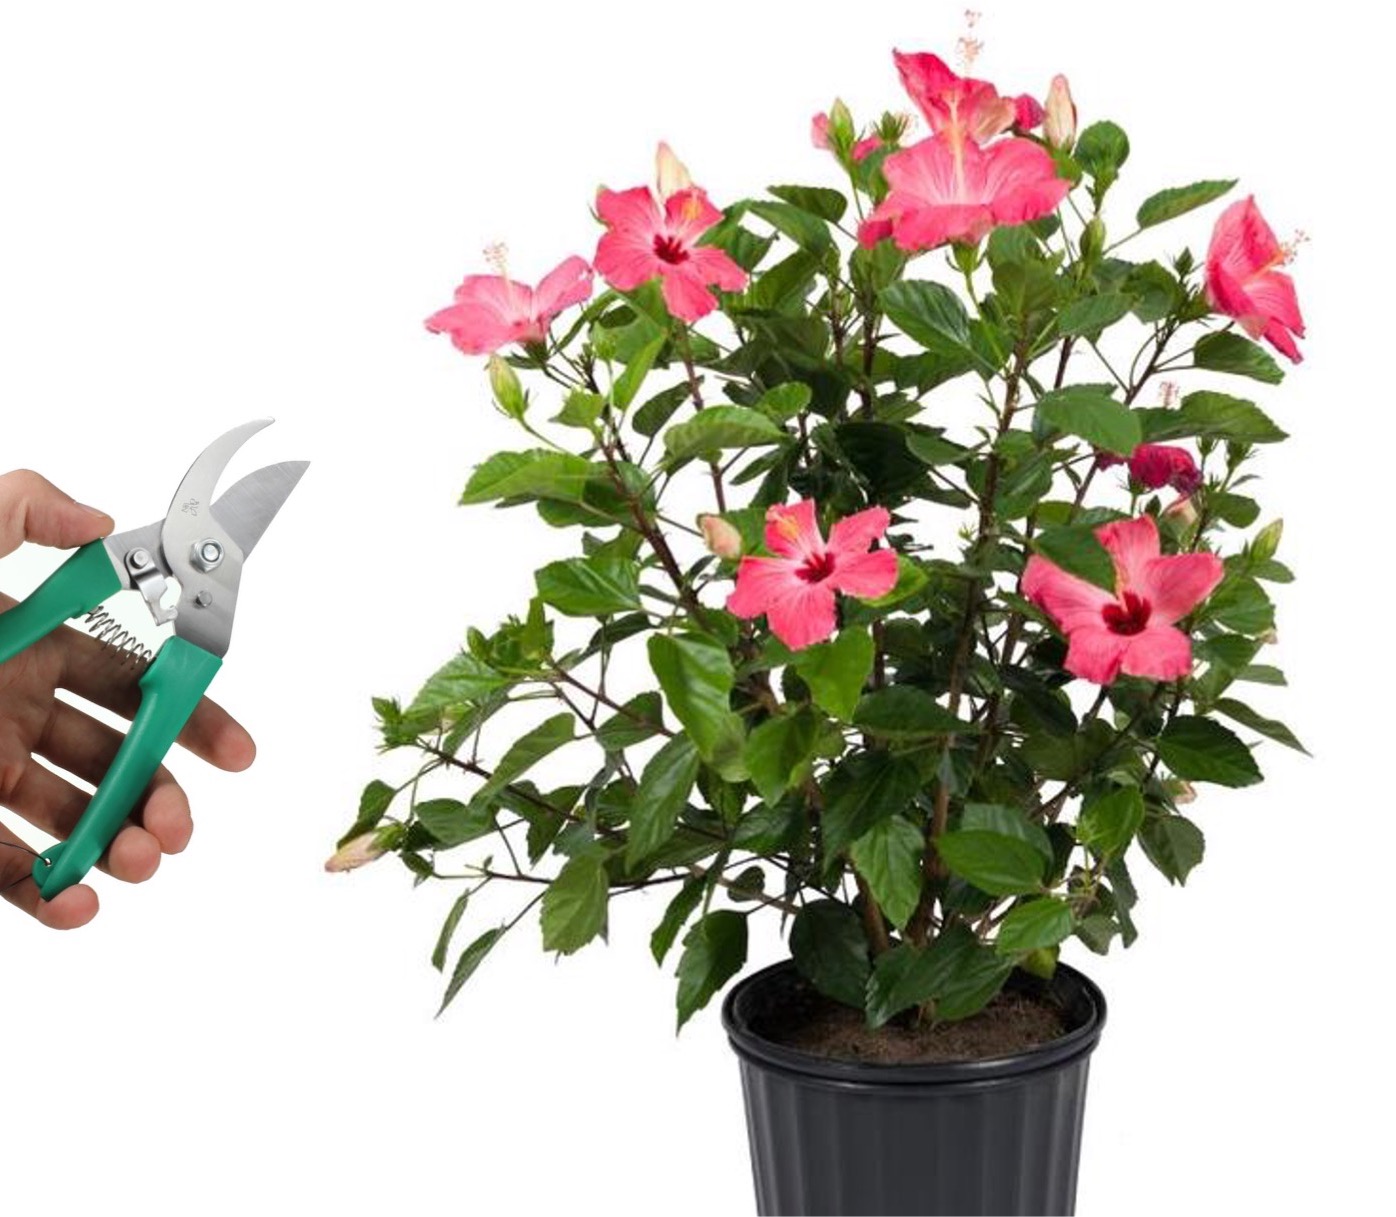 Hibiscus plant with pink flowers, Hand holding pruning shears.